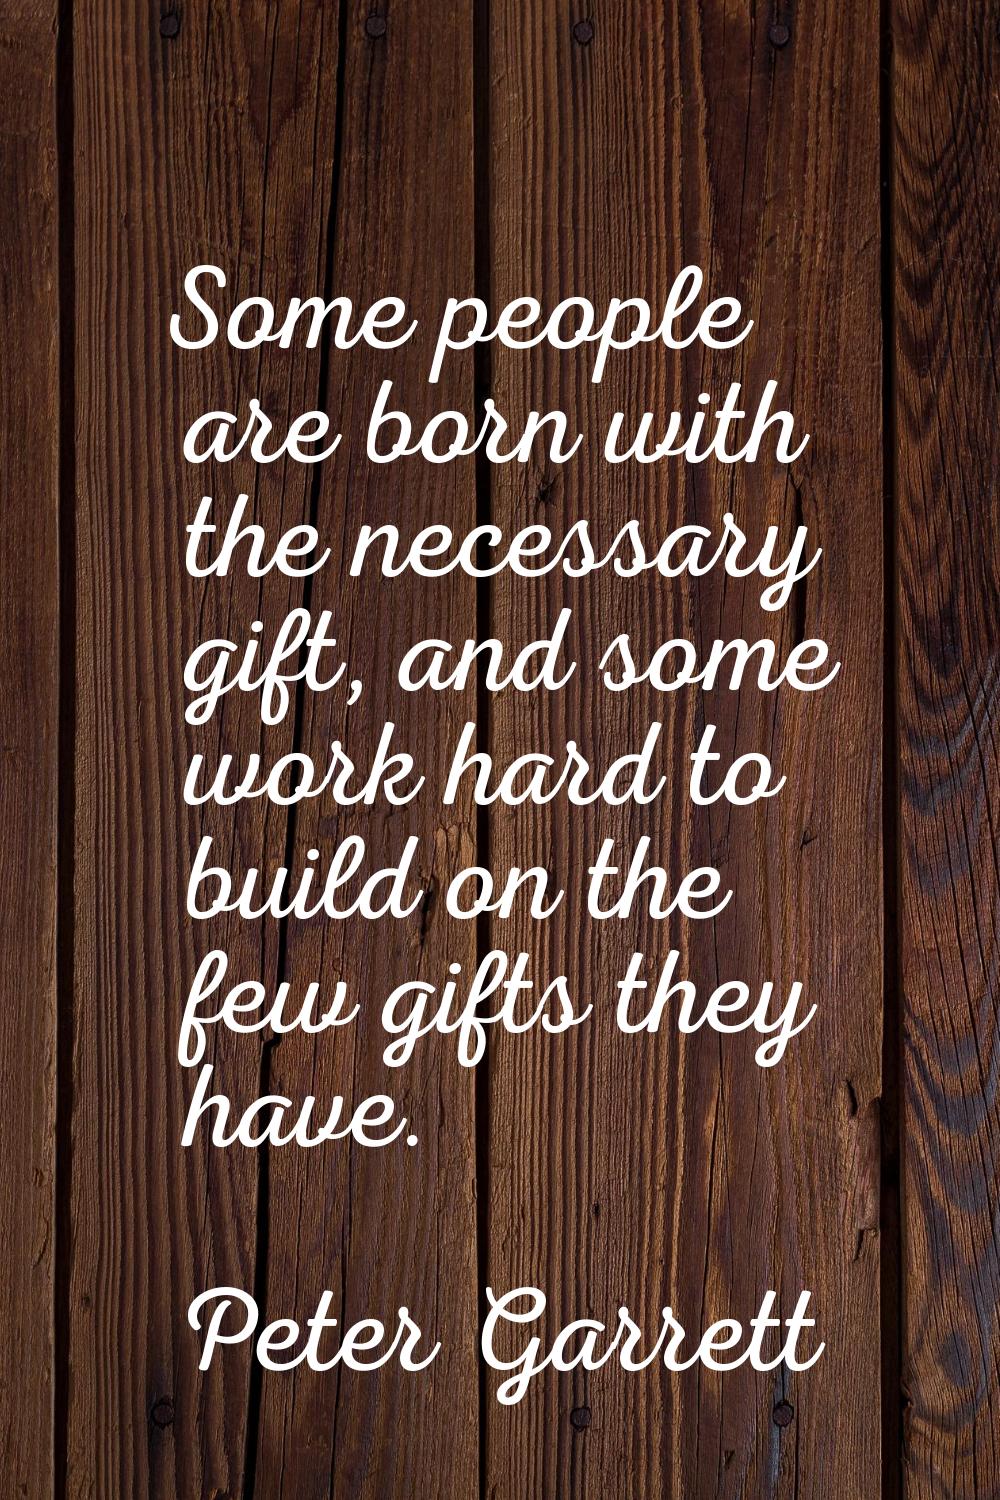 Some people are born with the necessary gift, and some work hard to build on the few gifts they hav